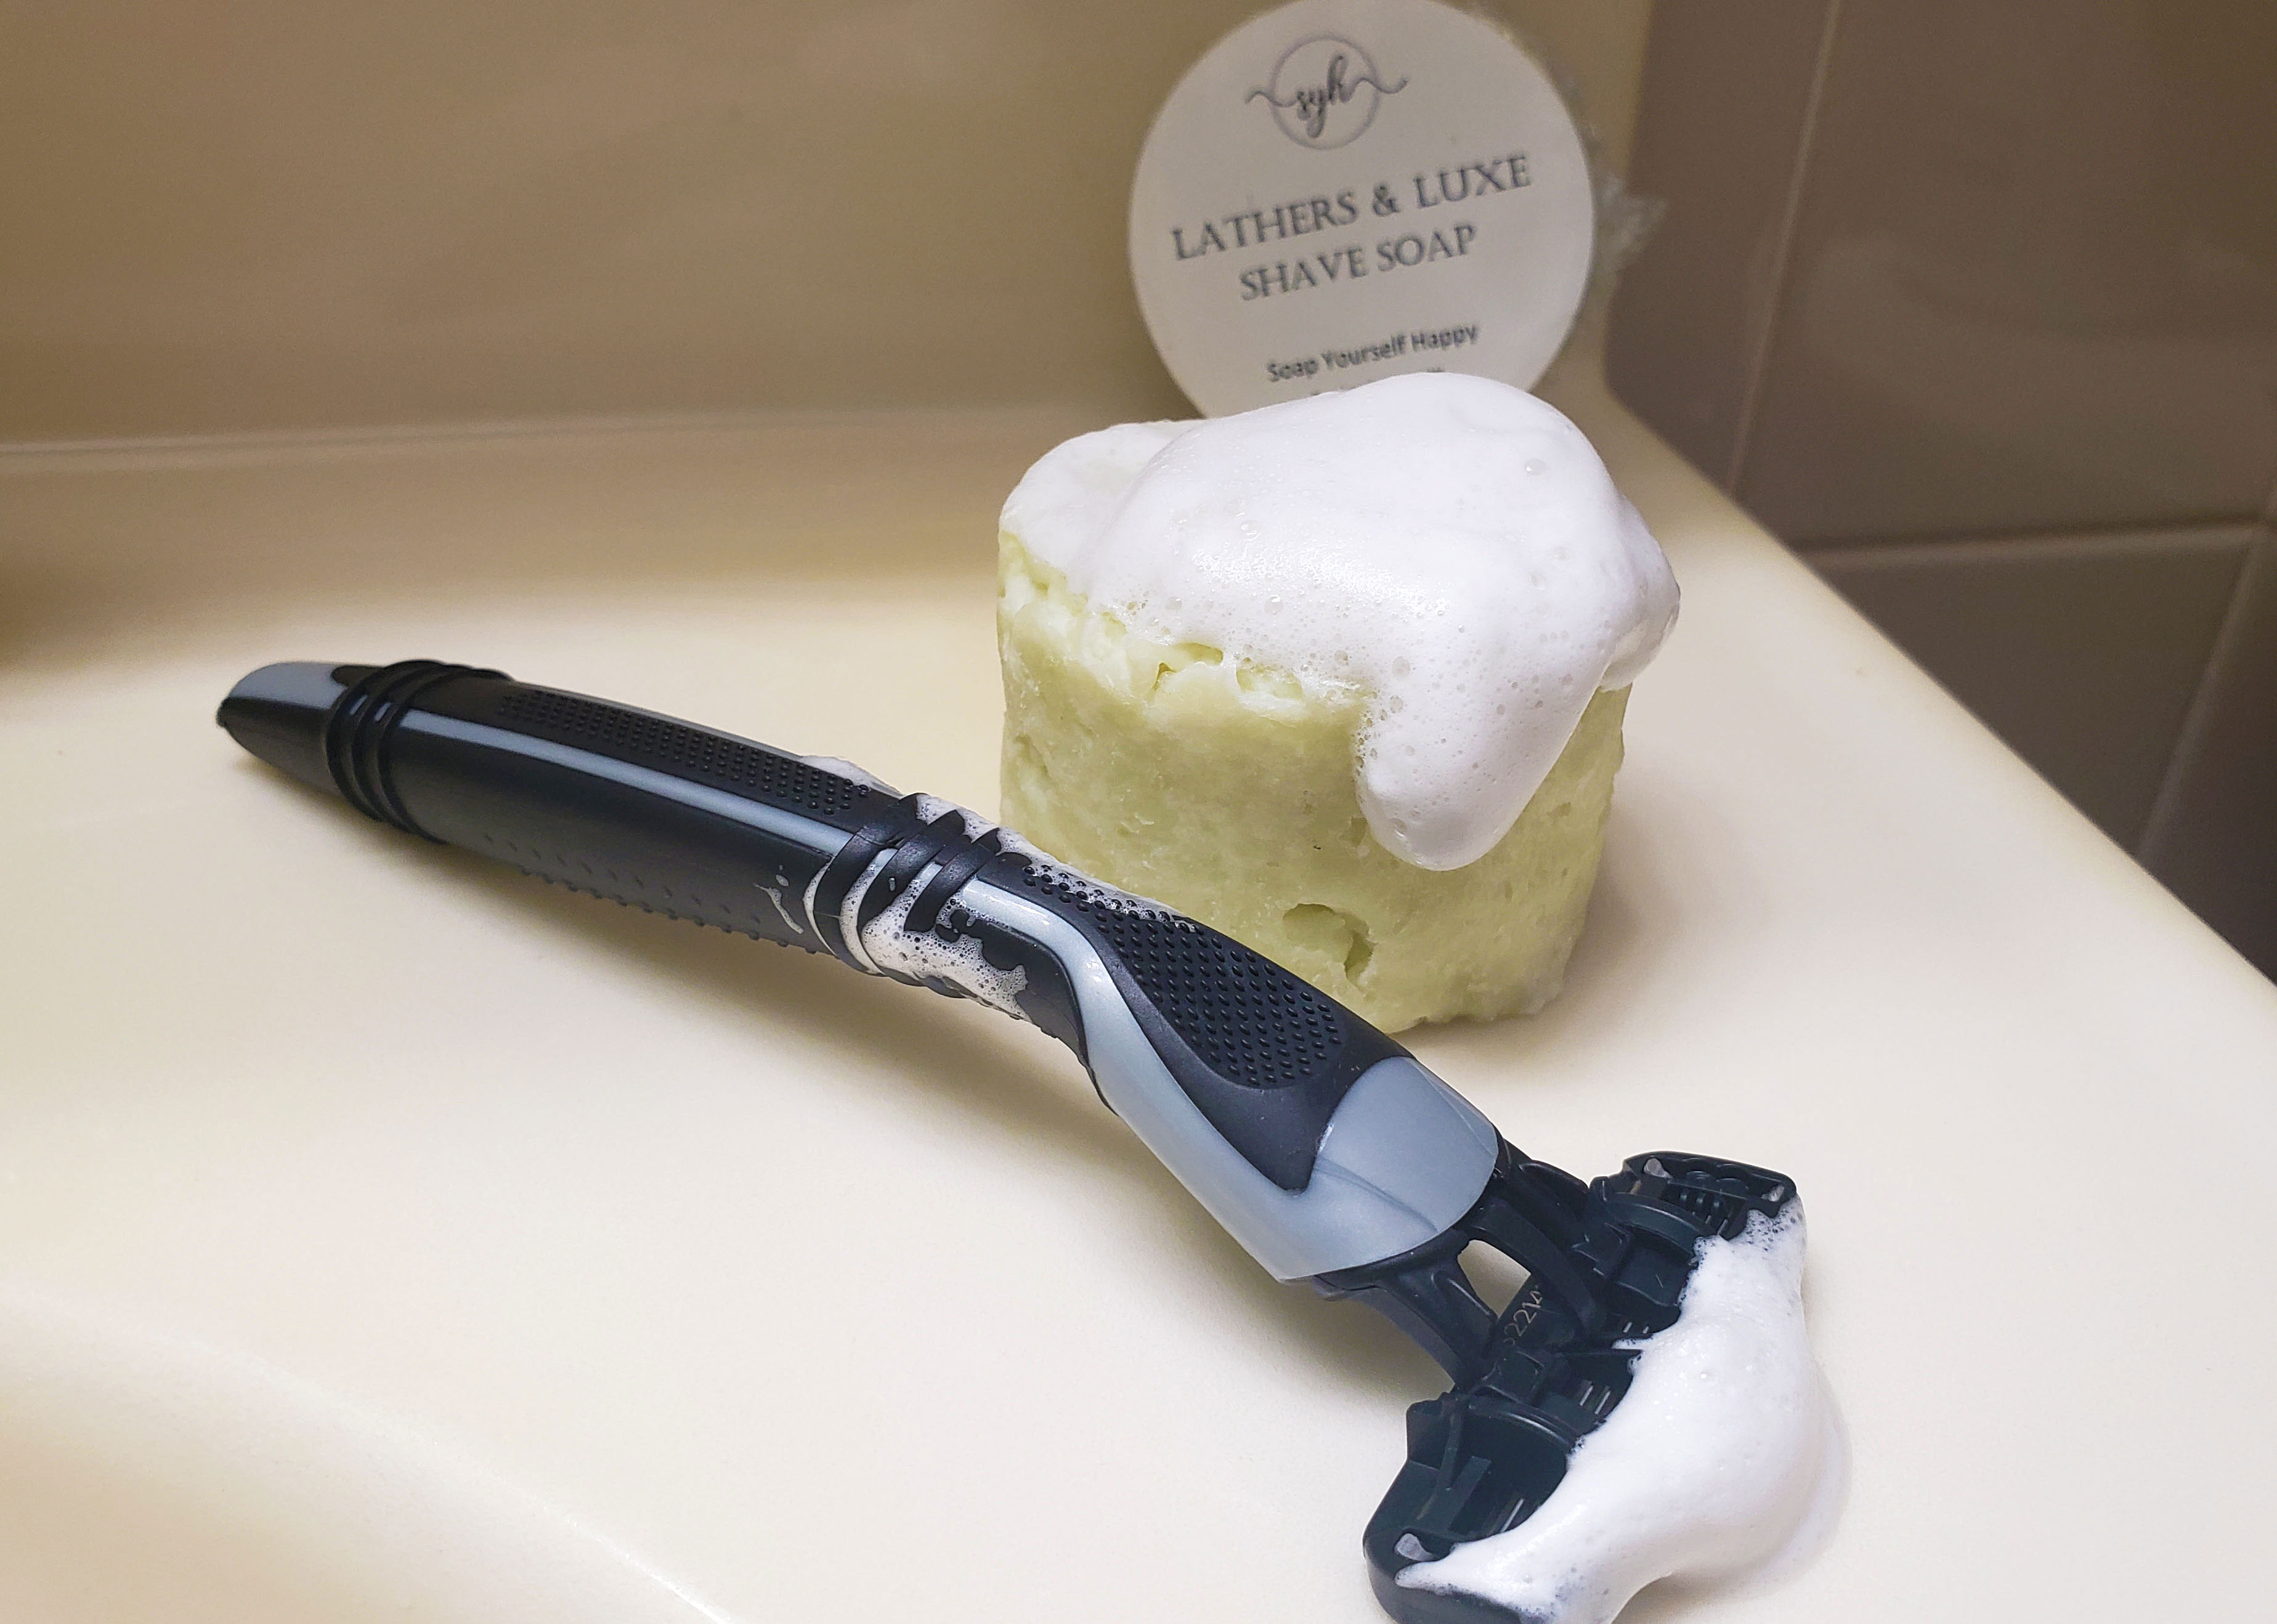 Lathers & Luxe Shave Soap